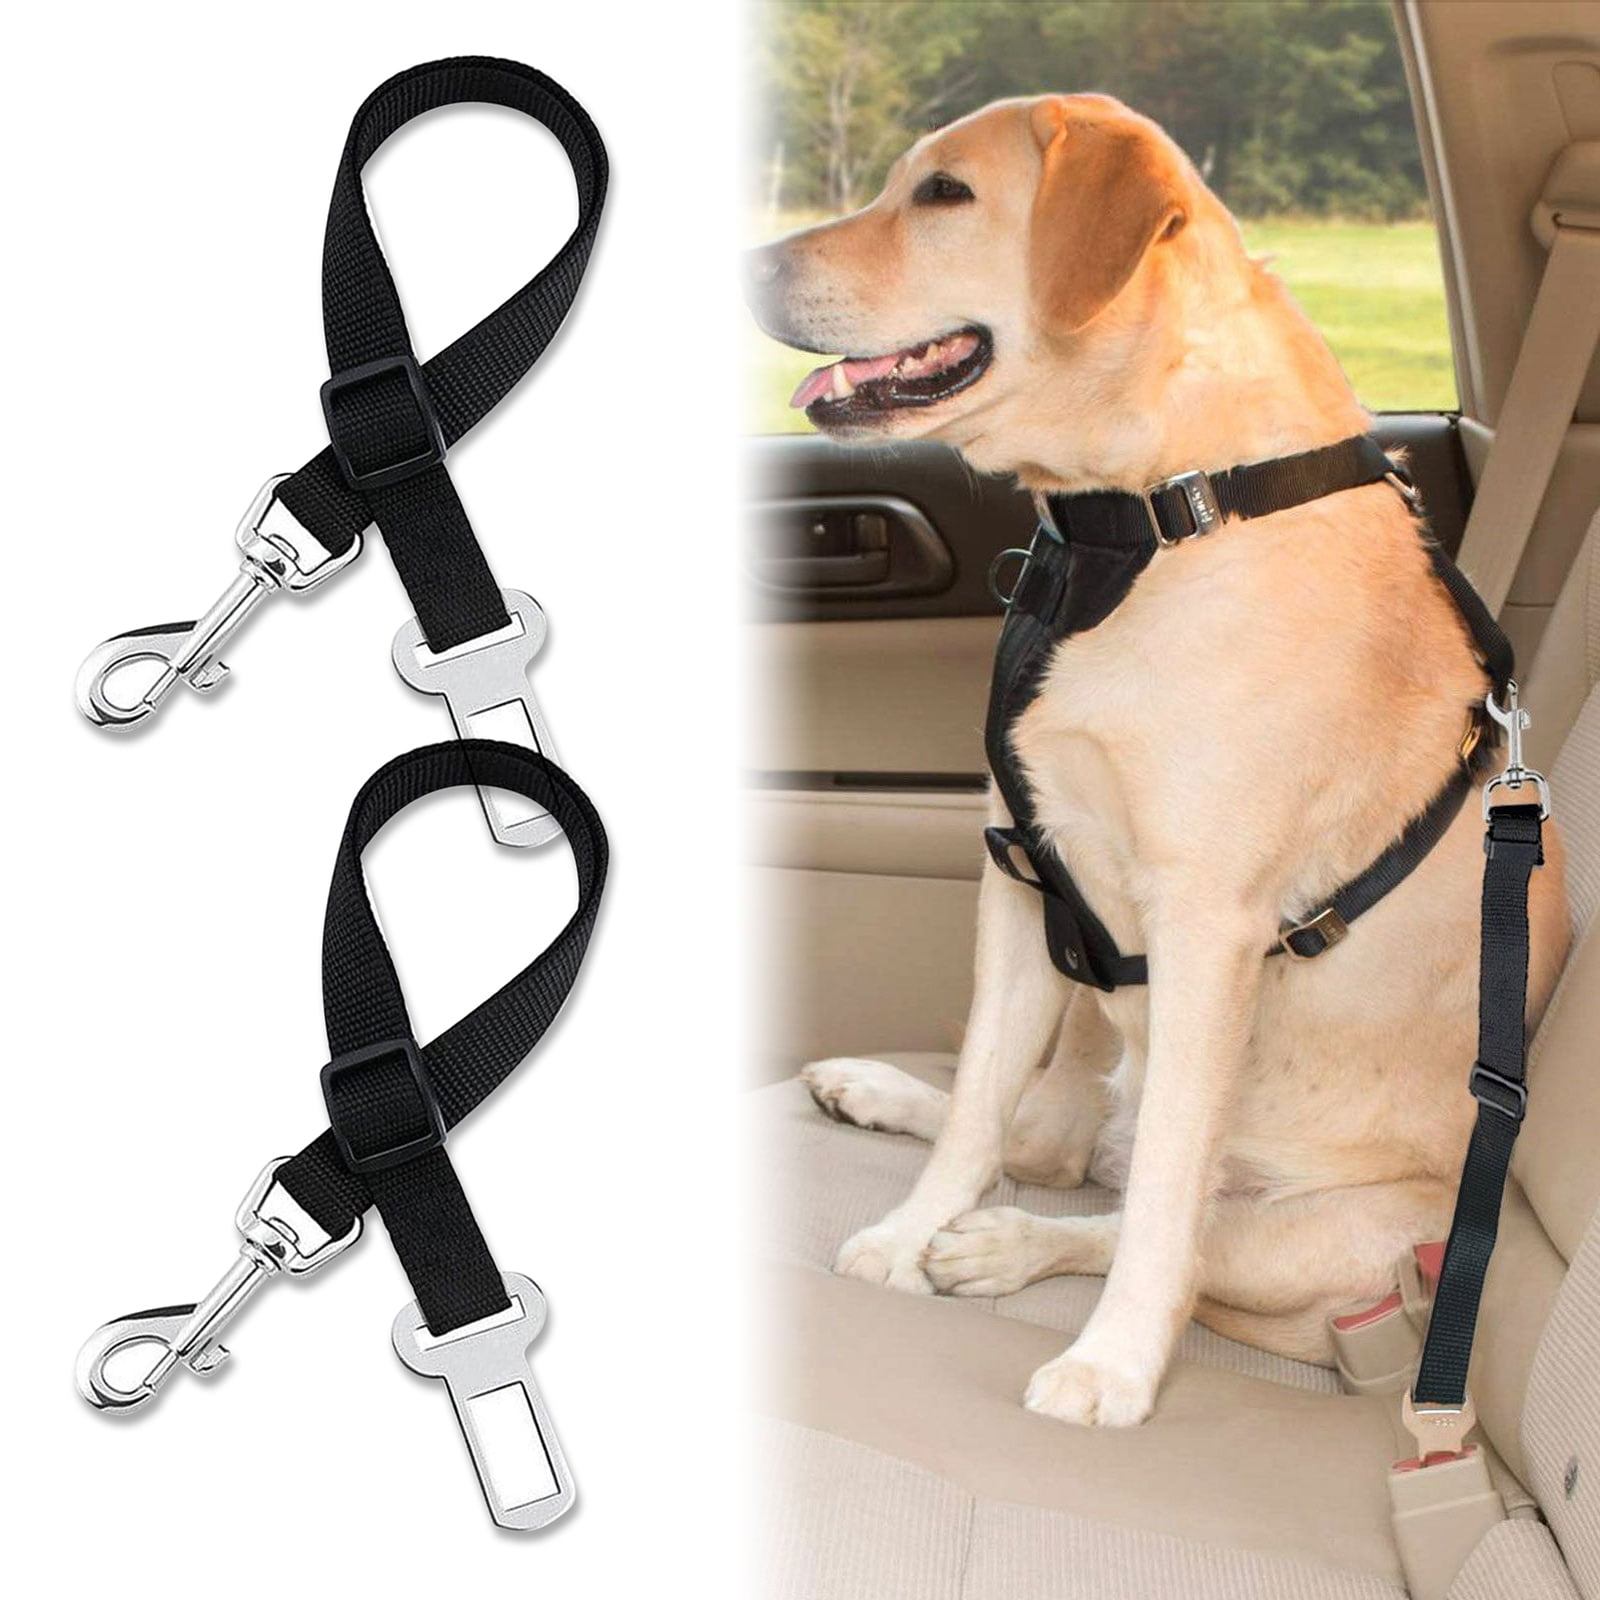 Dog Leash Rope Adjustable with Metal Buckle for Harness Lead Durable Nylon Black 